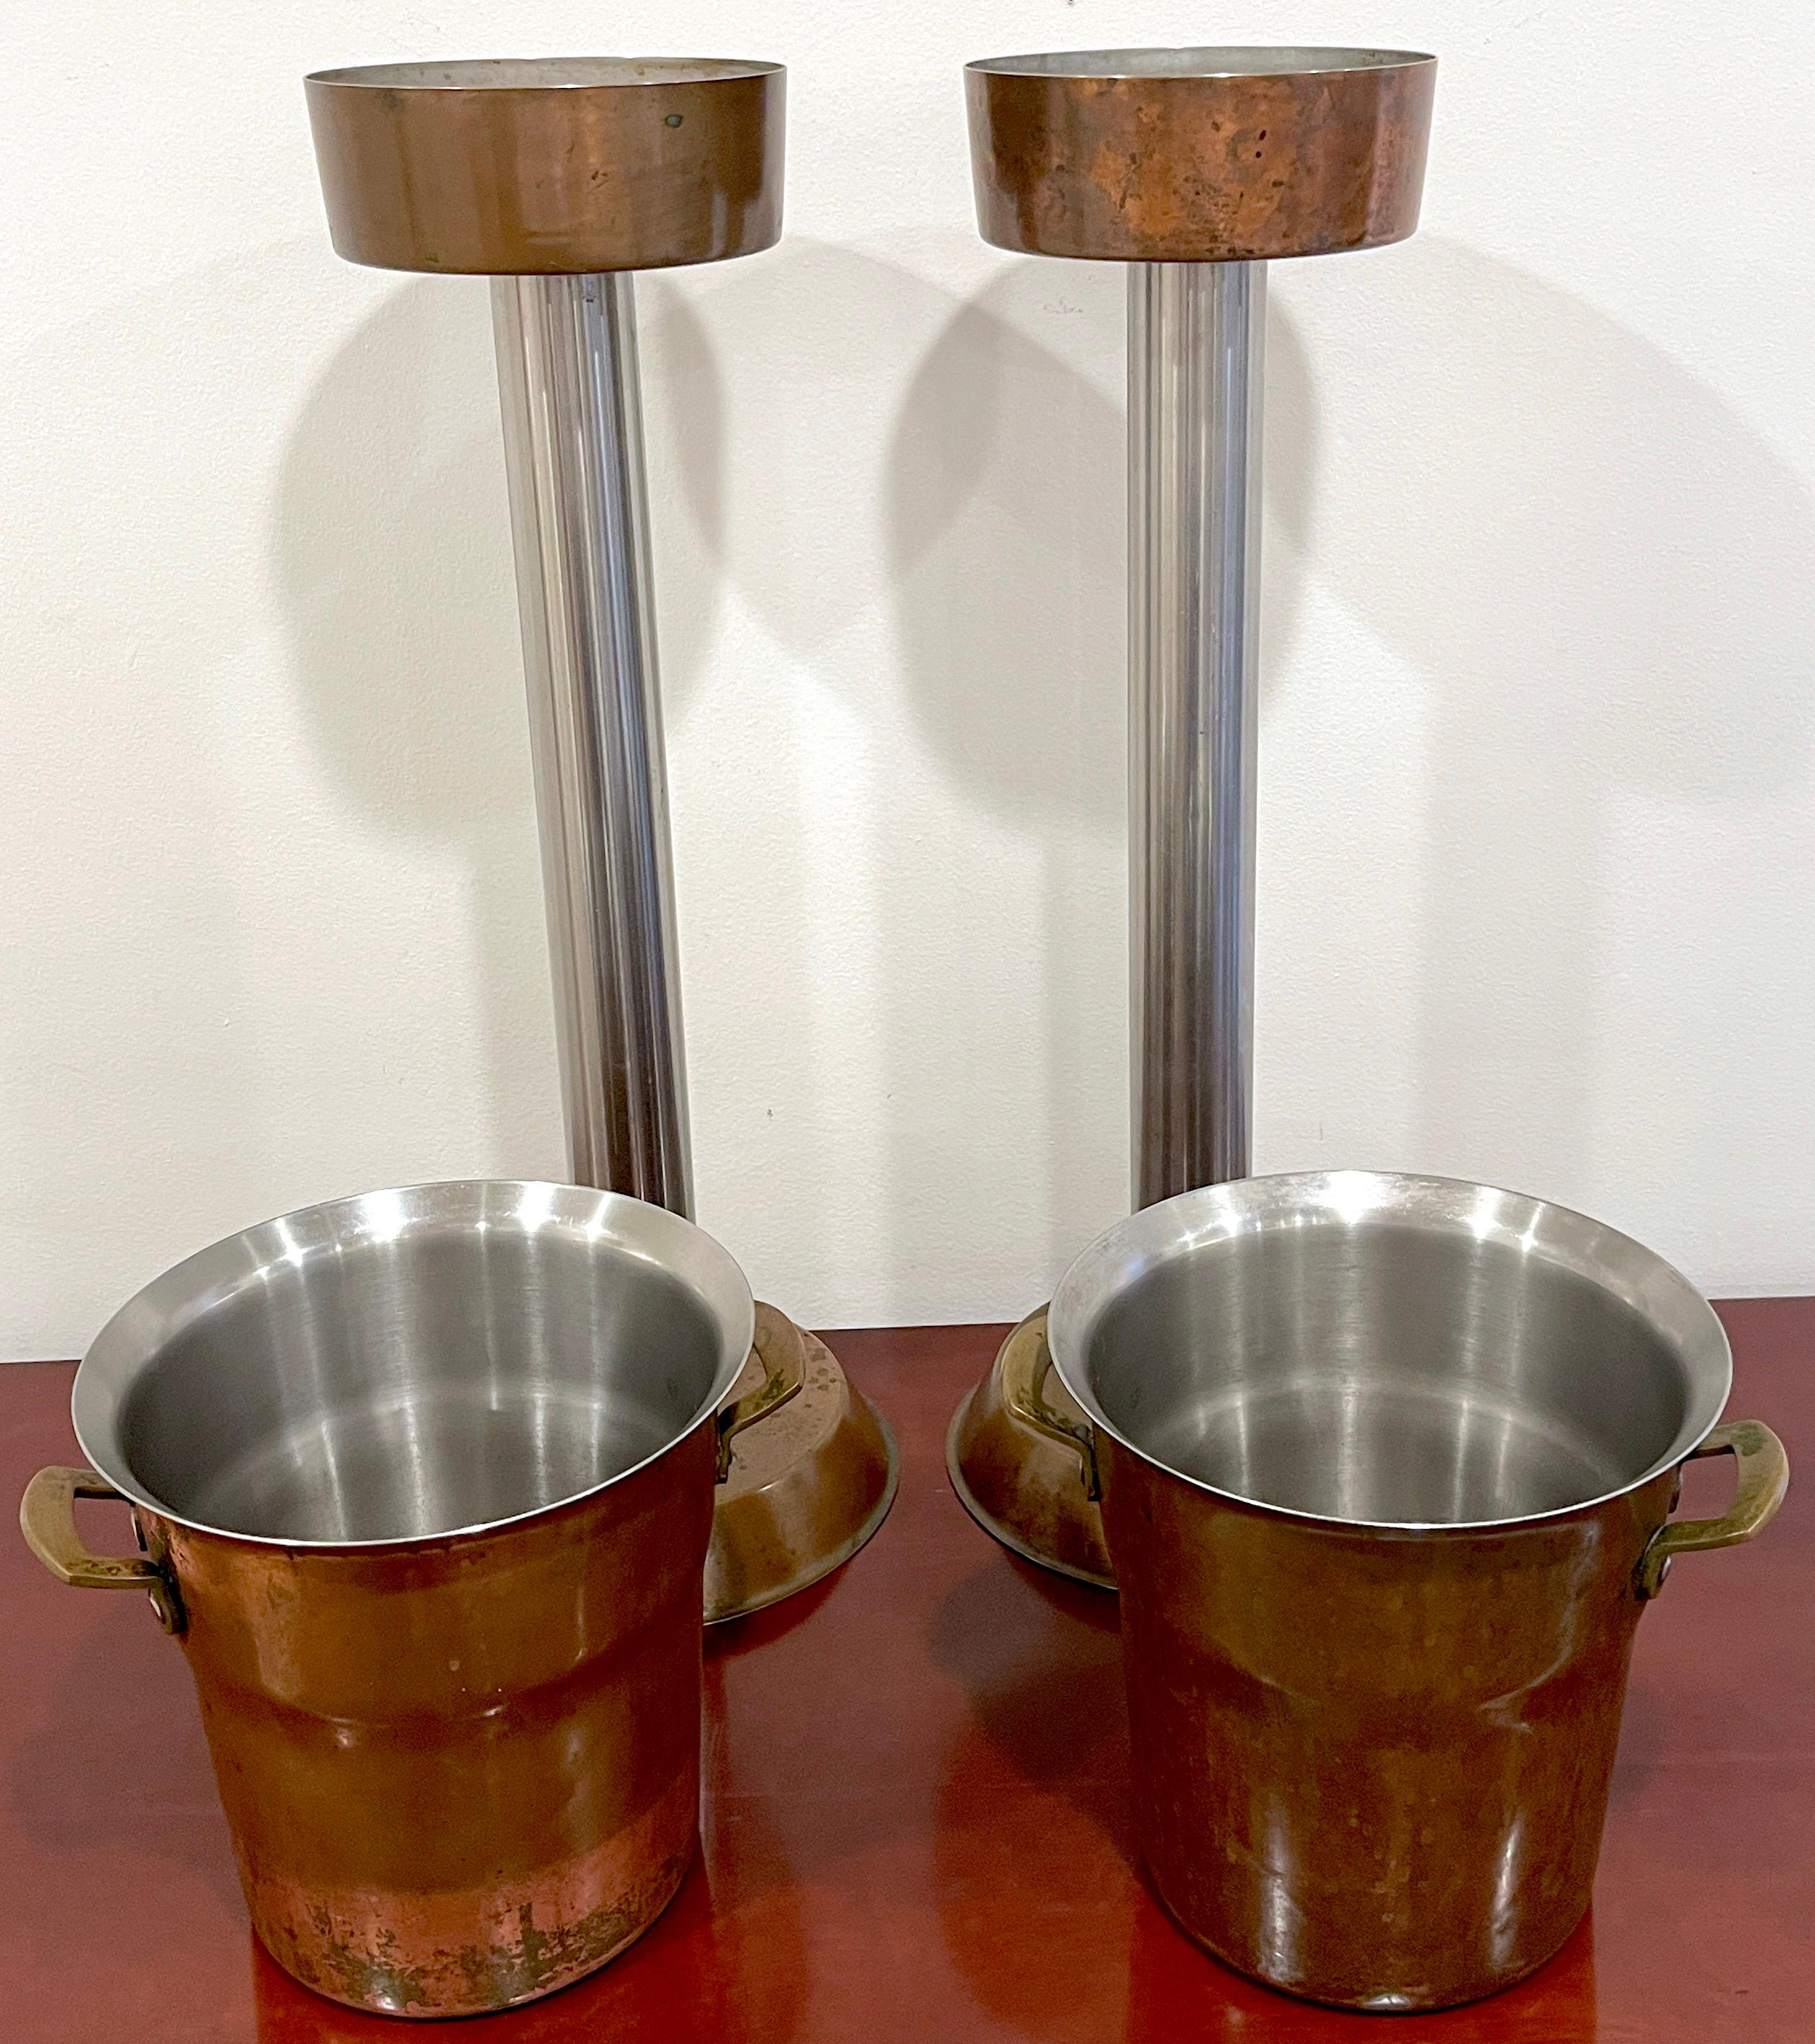 20th Century Pair of Hotel Copper & Steel Champagne Buckets & Stands, by Spring Culinox